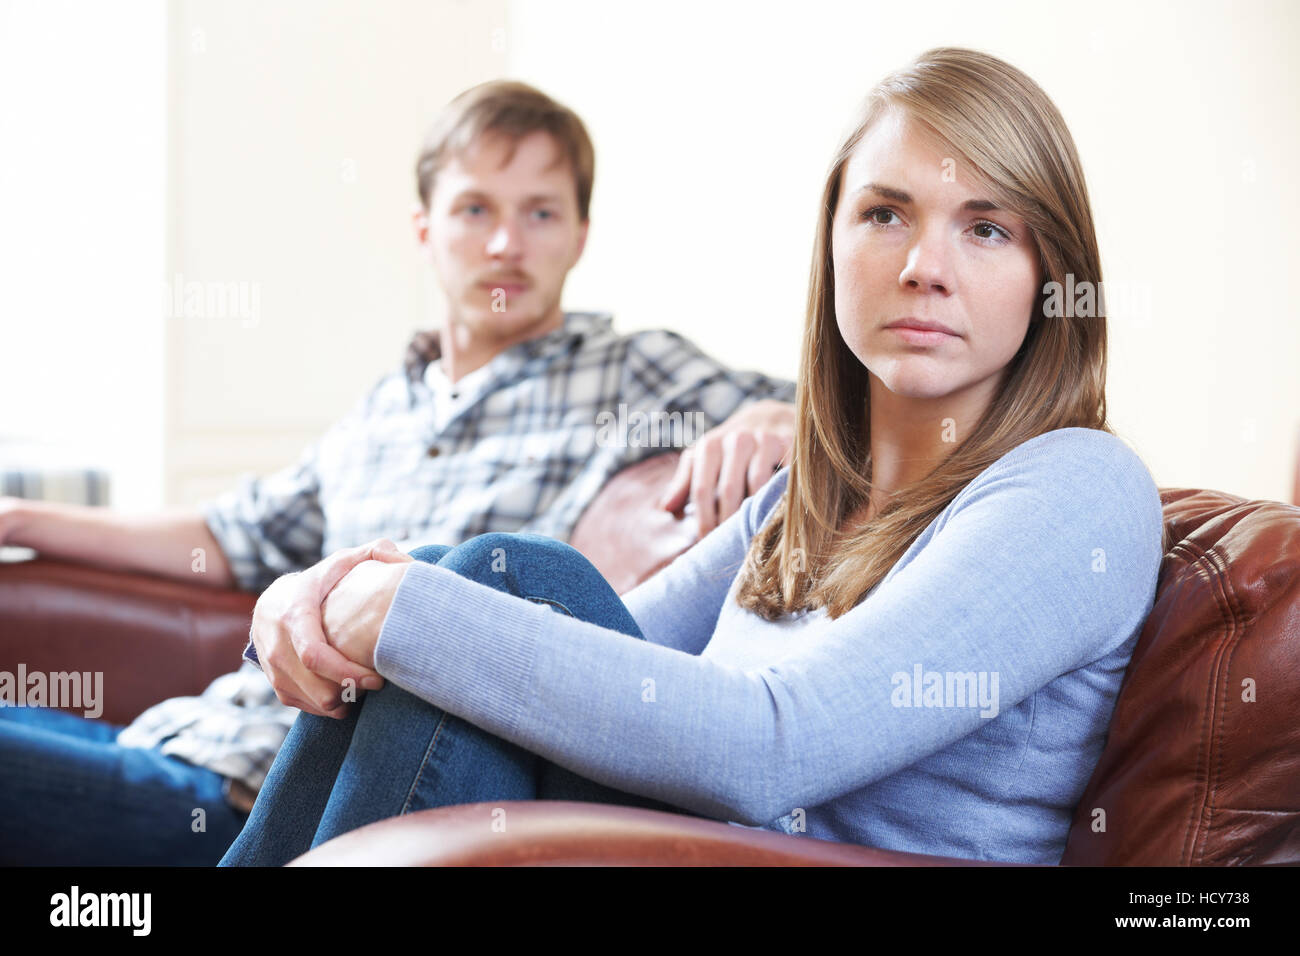 Couple With Relationship Difficulties Sitting On Sofa Stock Photo